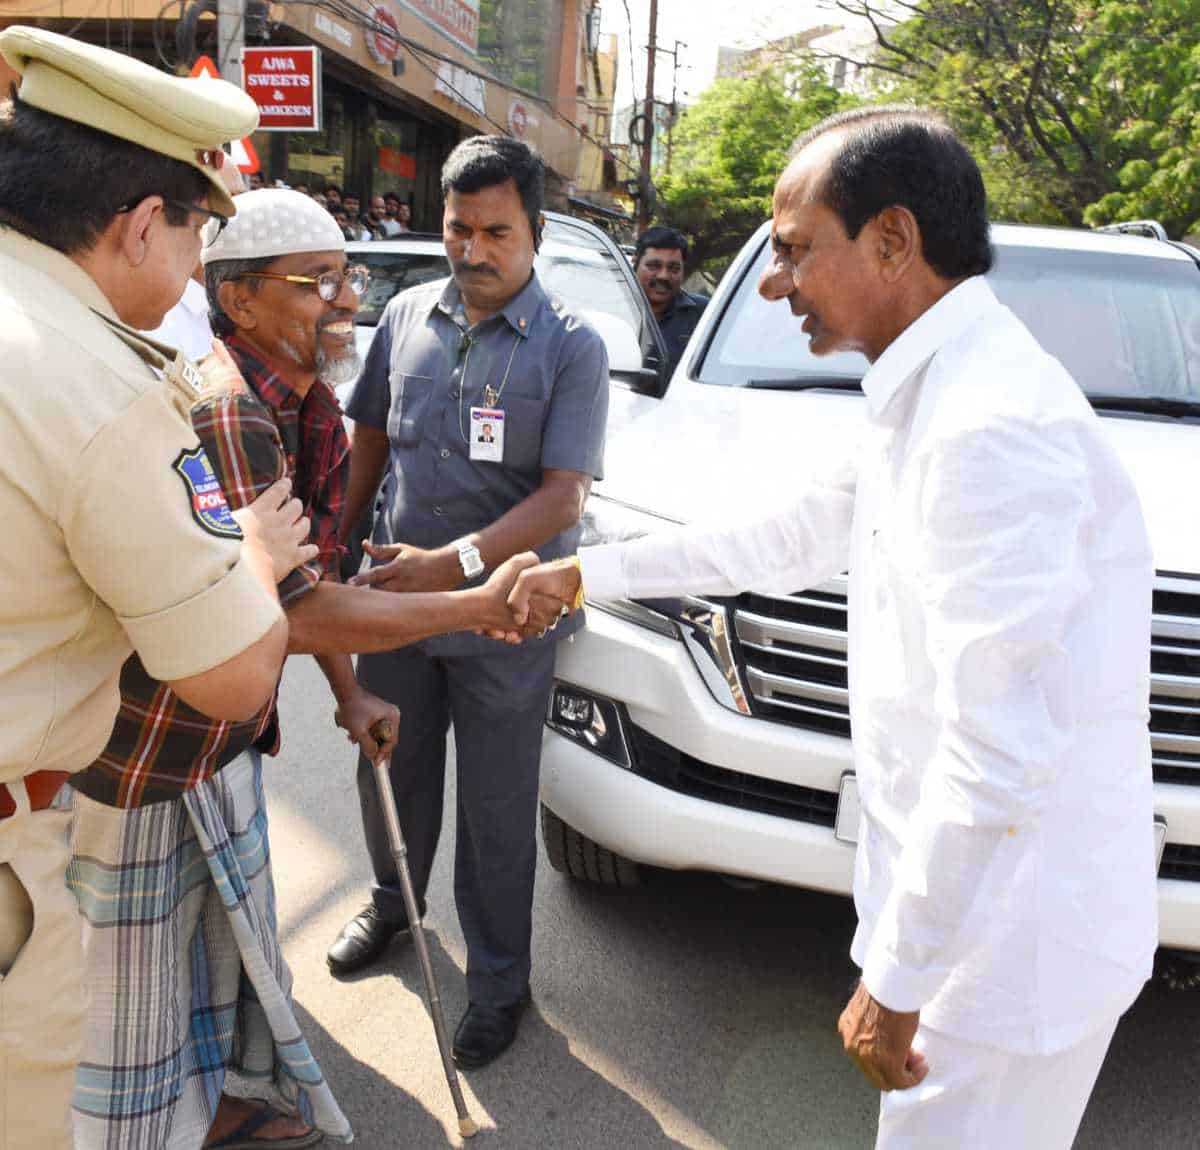 KCR exits chauffered official vehicle to rescue disabled man